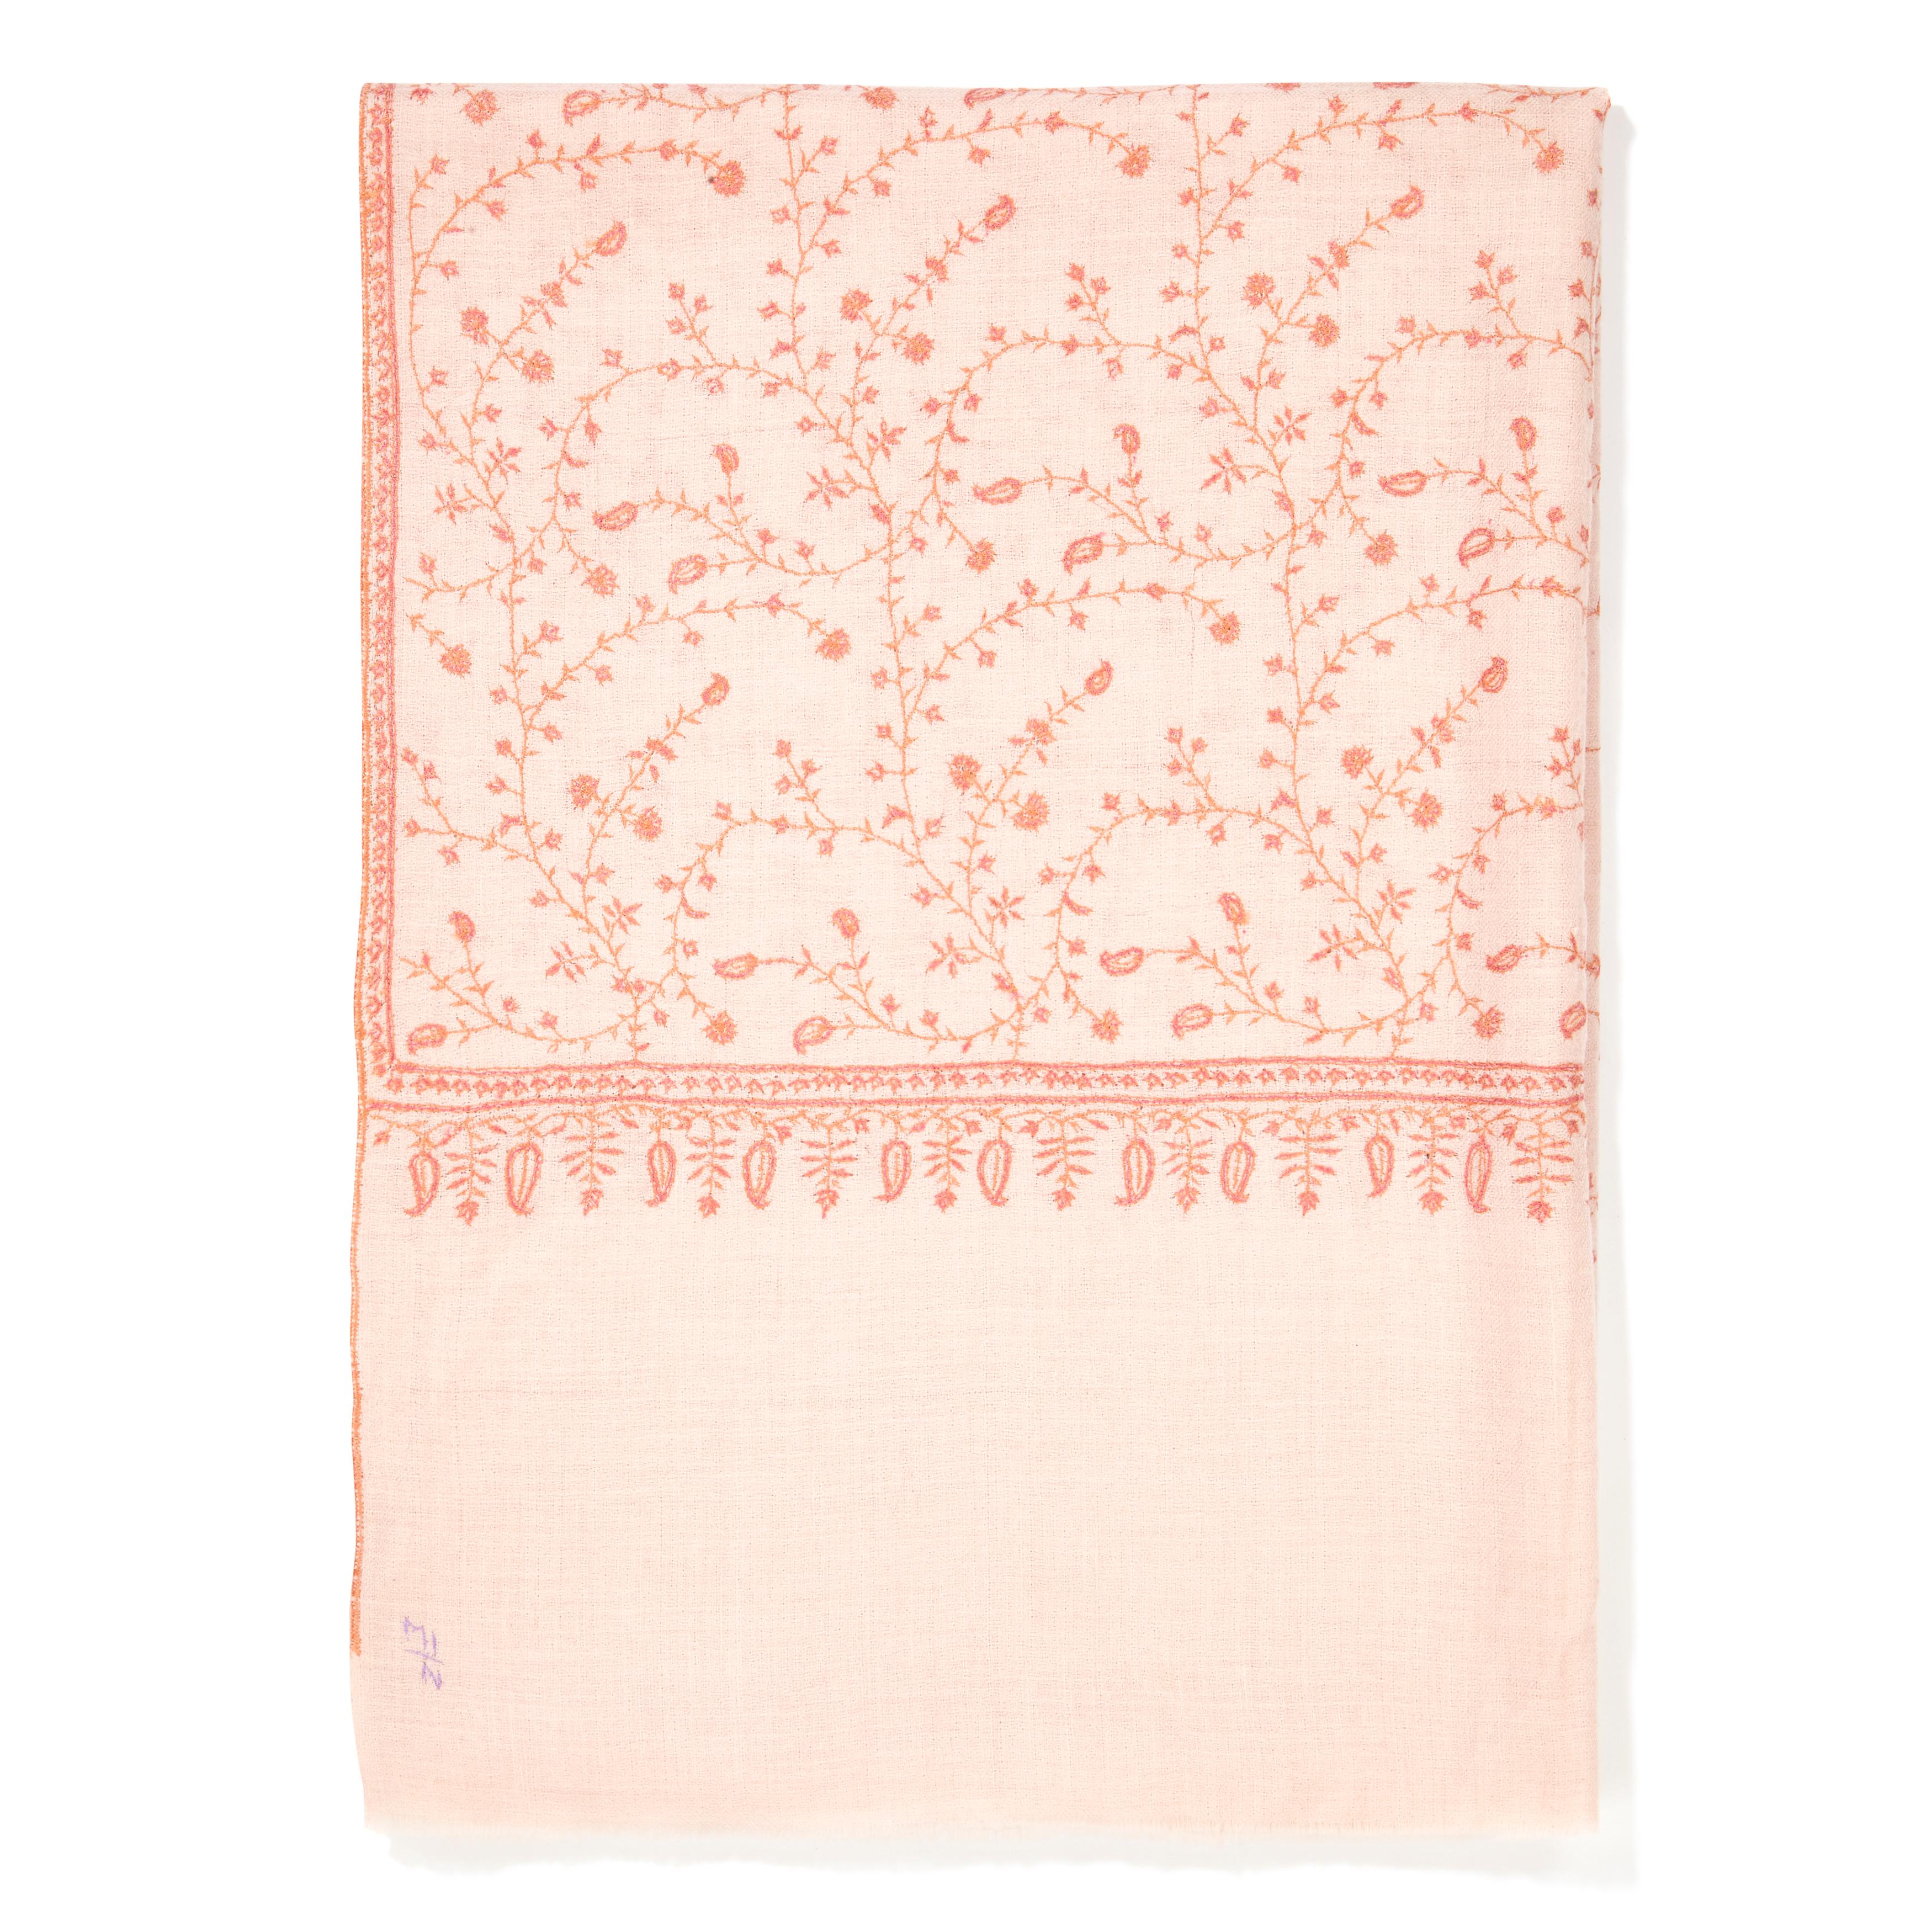 Hand Embroidered Pale Pink 100% Cashmere Shawl Scarf from Kashmir 

The perfect Christmas gift for someone special - this shawl is unique and handmade. 
Verheyen London’s shawl is spun from the finest embroidered woven cashmere from Kashmir.  The